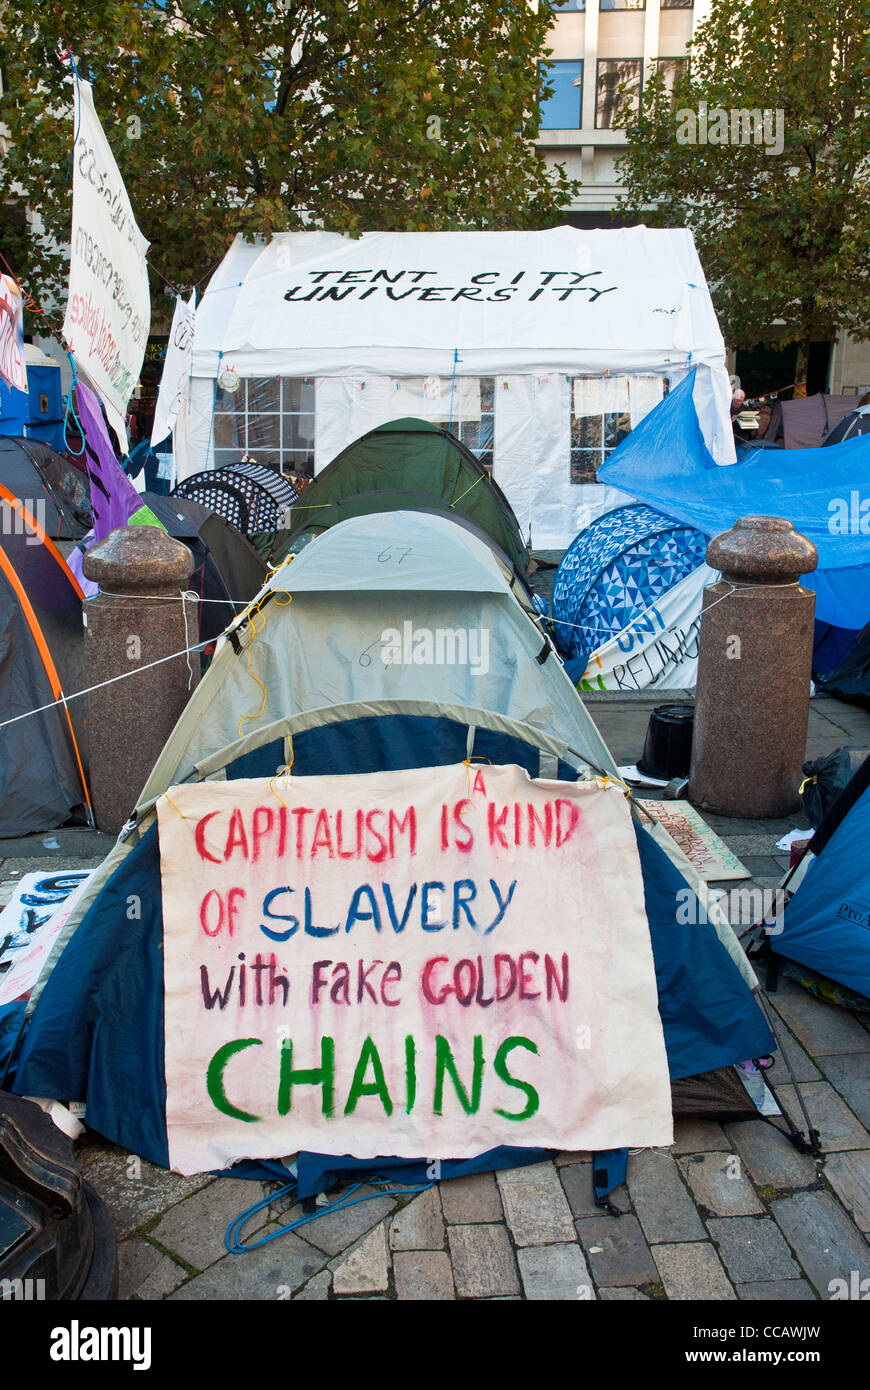 Occupy London St Pauls, banner 'Capitalism is a kind of slavery with fake golden chains' and behind 'Tent City University'. Stock Photo